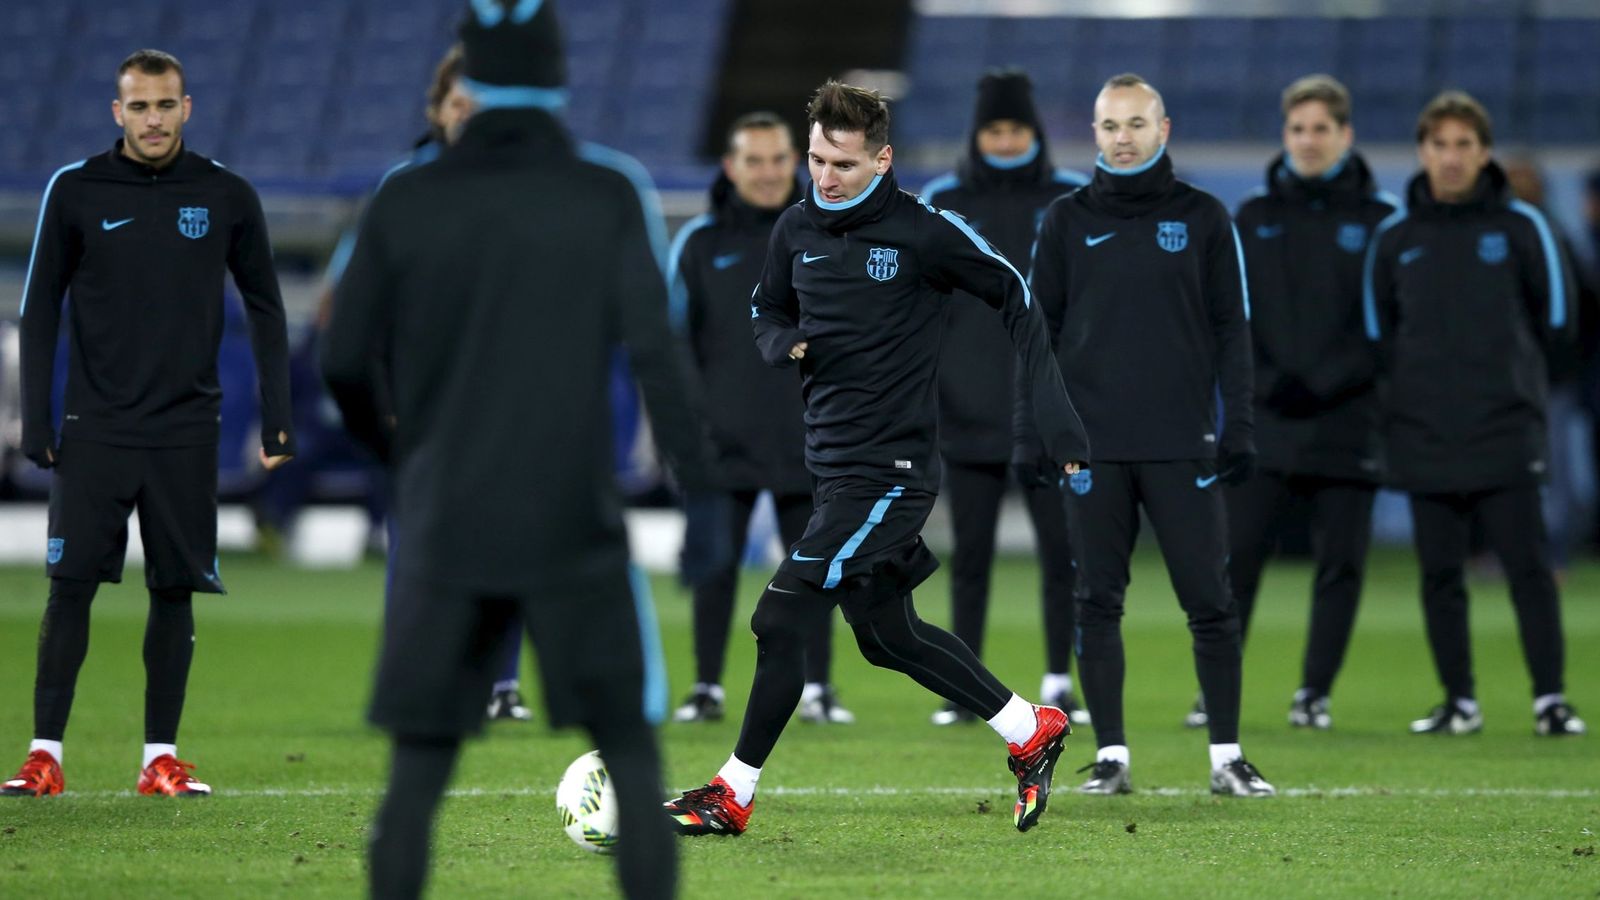 Foto: Barcelona's soccer player messi controls the ball in front of team mate iniesta, coach enrique and other team members during a training session ahead of their club world cup final soccer match against argentine club river plate in yokohama